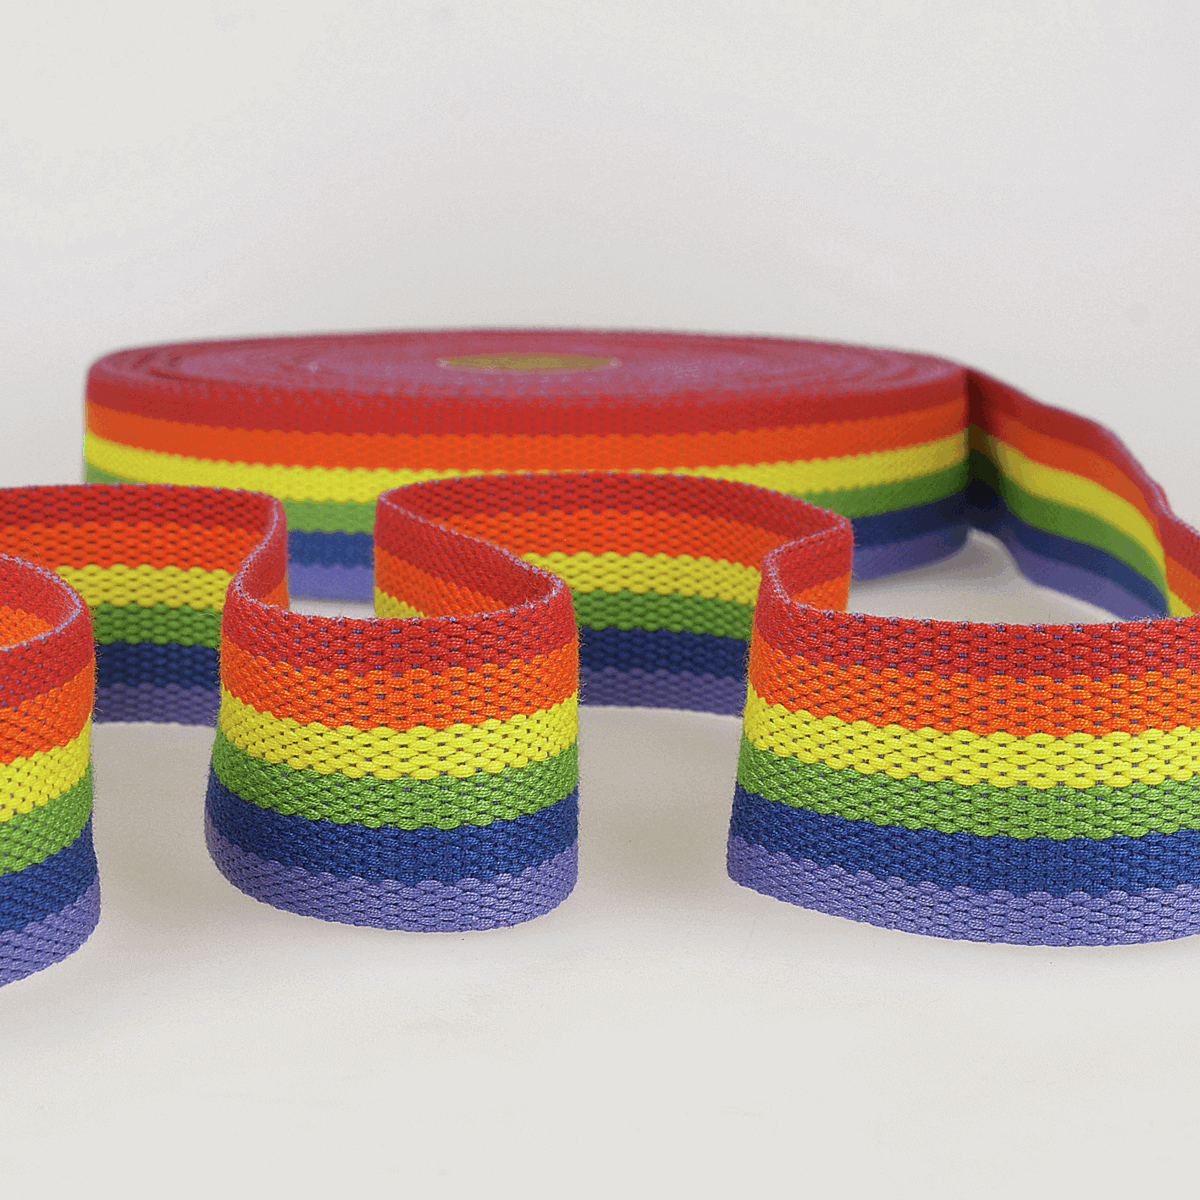 Striped Rainbow Webbing, belt, bag strapping 40 mm. Heavyweight. By the Metre.